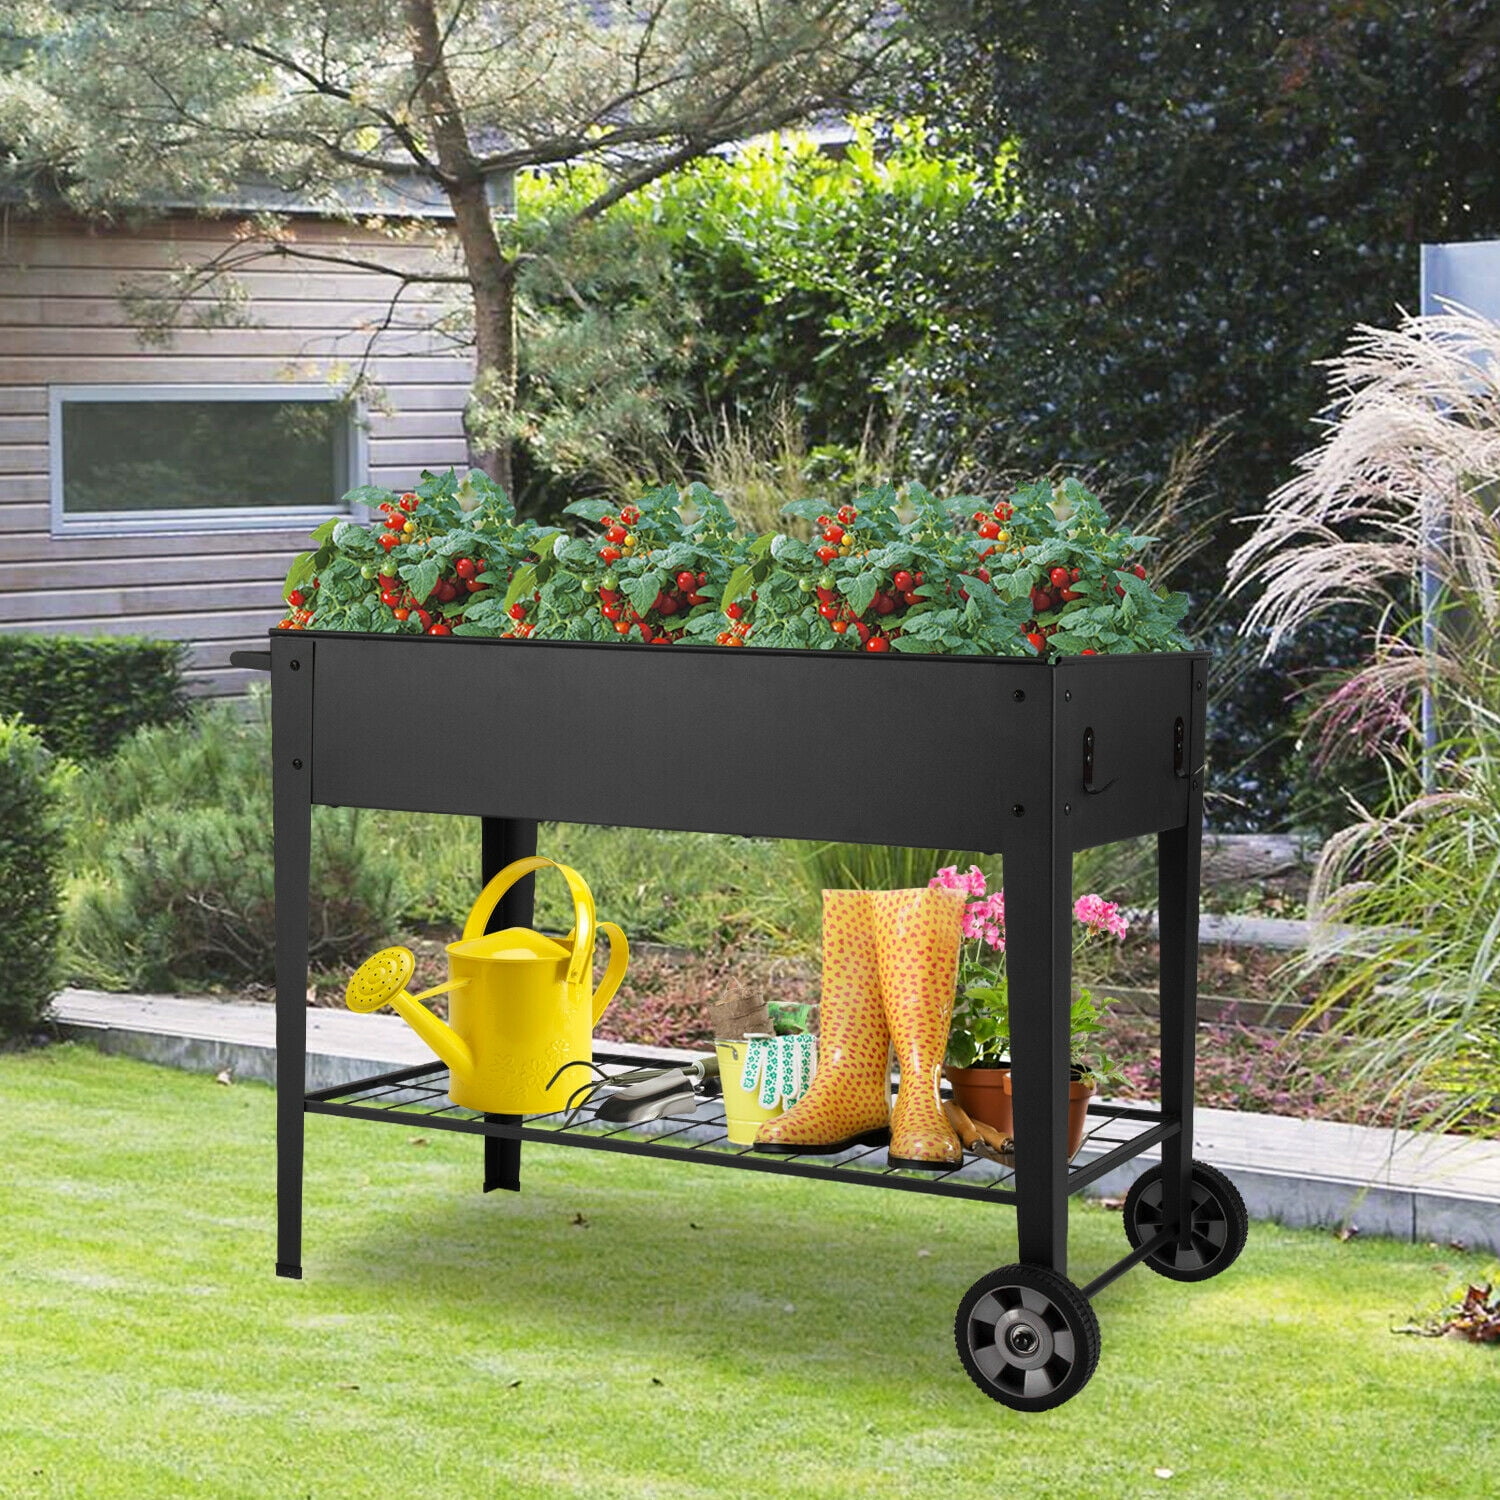 New Arrival Raised Garden Bed with Legs Outdoor Raised Planter Box on ...